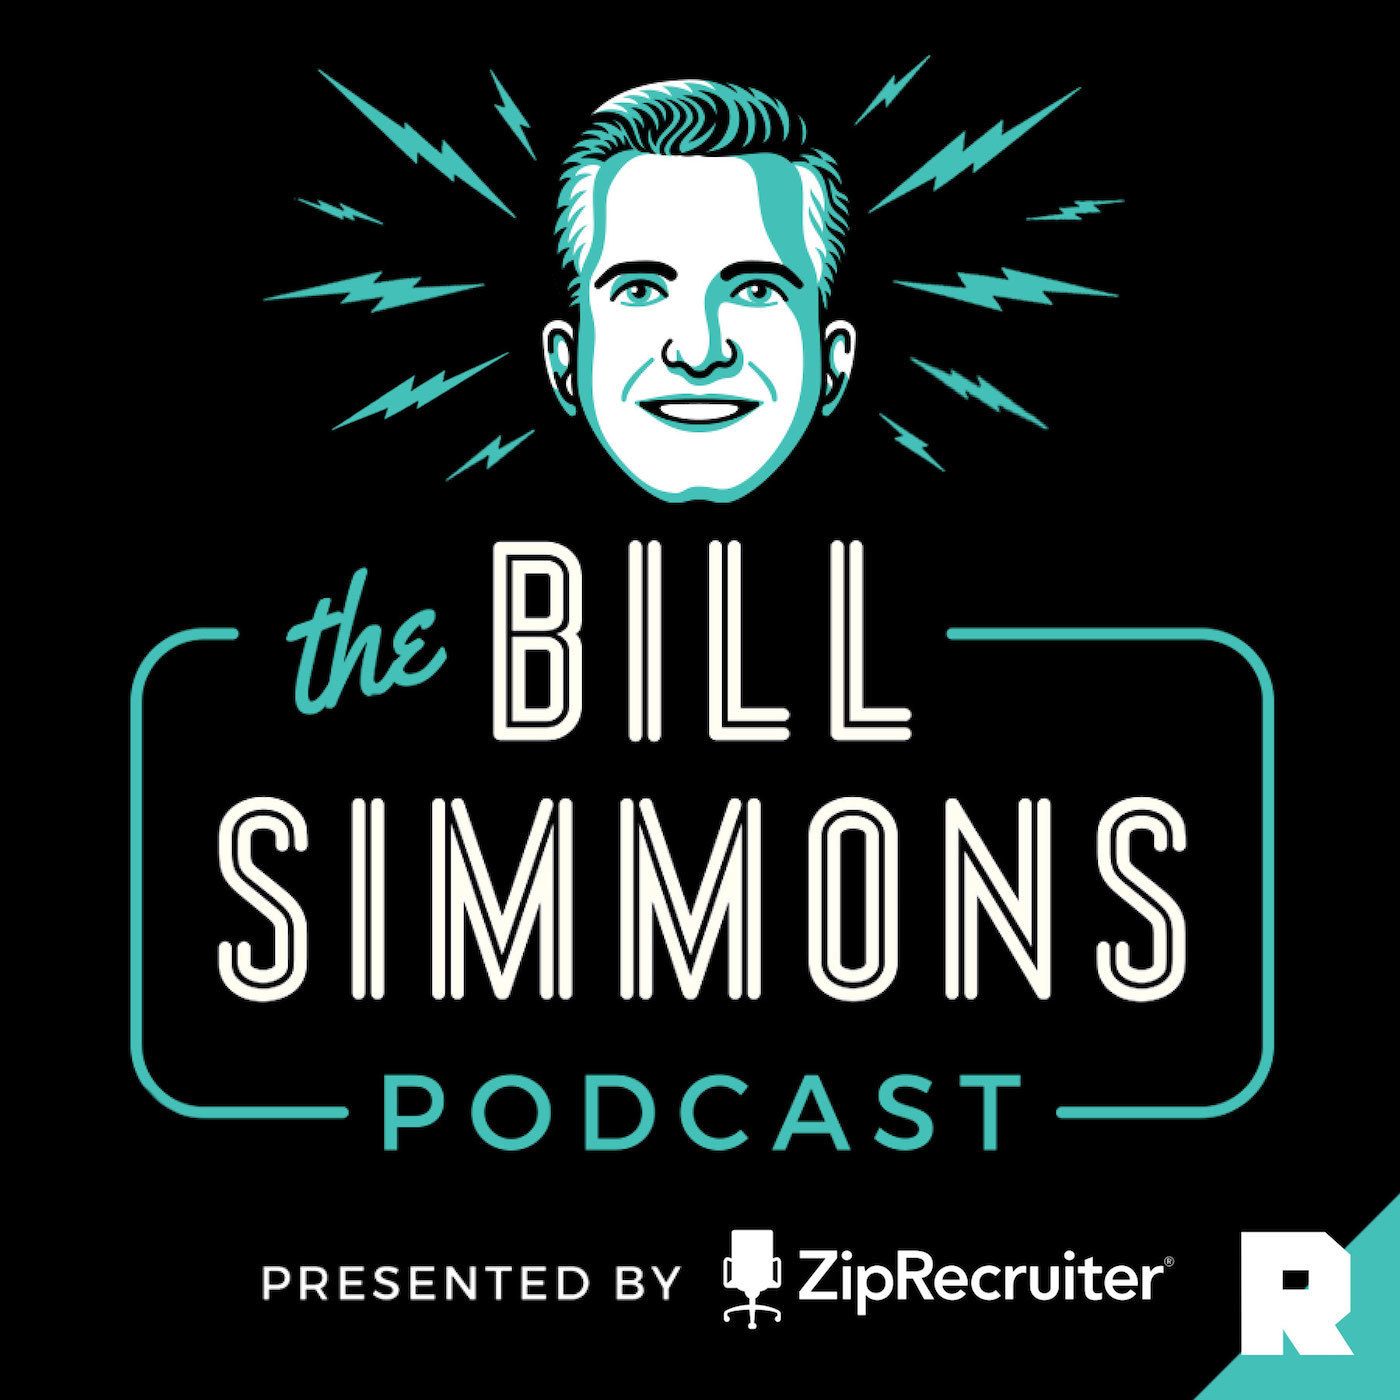 Kara and Bill Simmons Are The "OGs" in the Podcasting